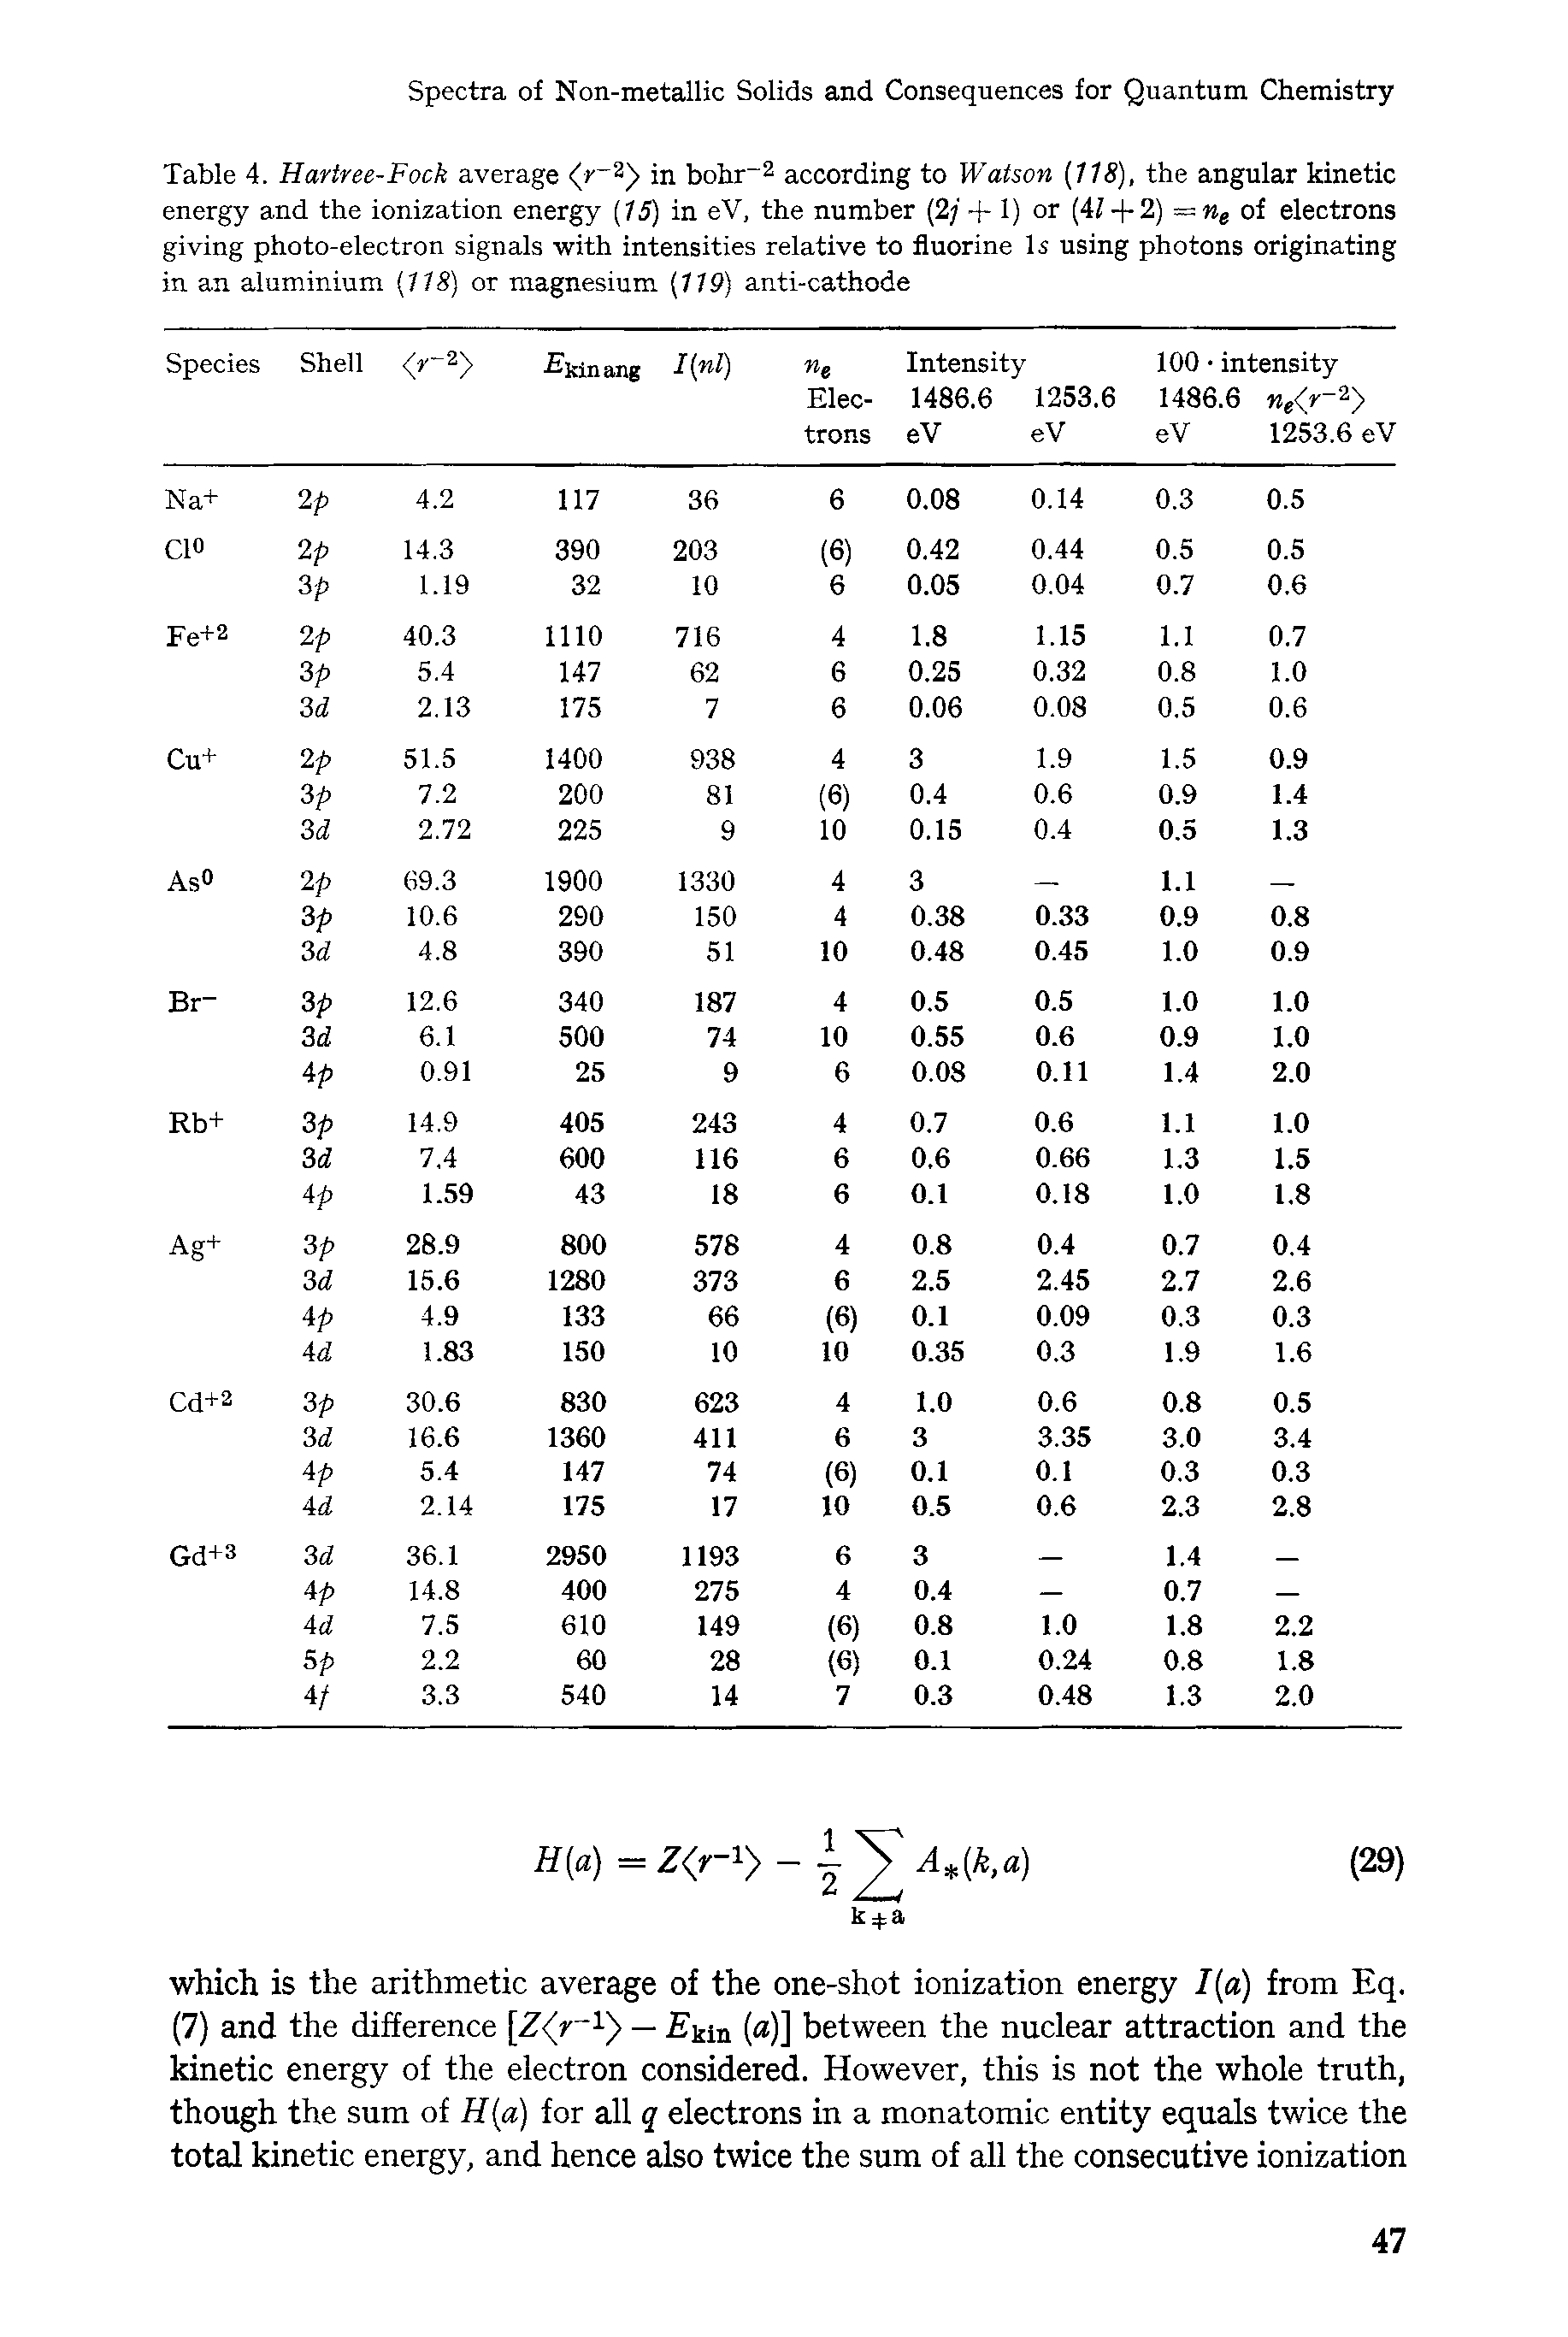 Table 4. Hartree-Fock average <r 2> in bohr-2 according to Watson (118), the angular kinetic energy and the ionization energy (15) in eV, the number (2 + 1) or (41 + 2) = ne of electrons giving photo-electron signals with intensities relative to fluorine Is using photons originating in an aluminium (118) or magnesium (119) anti-cathode...